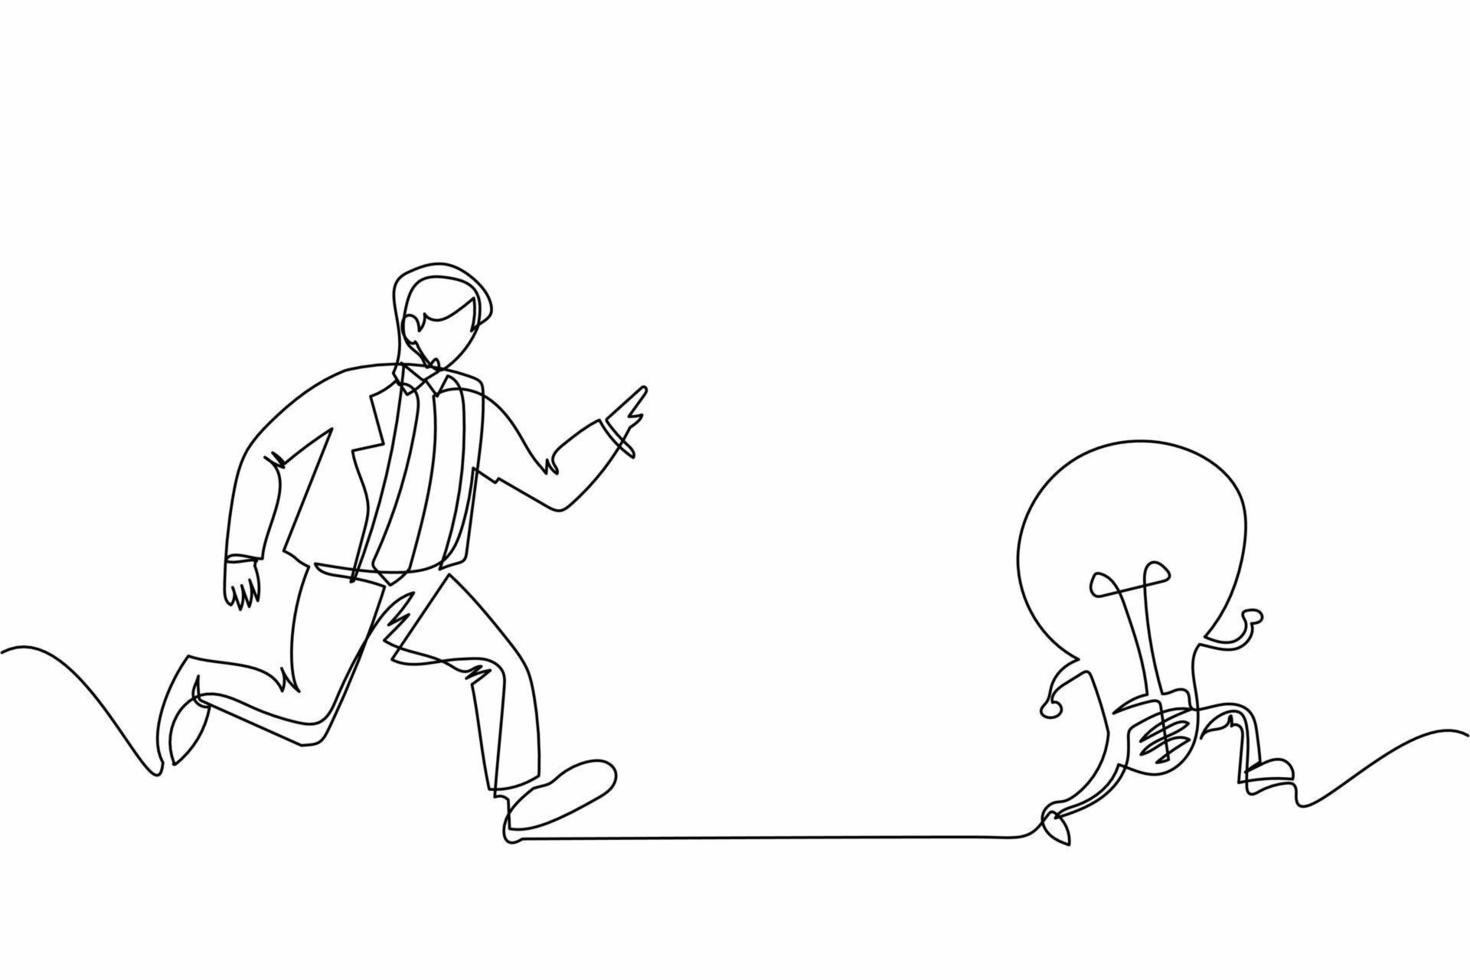 Continuous one line drawing businessman run chasing try to catch idea light bulb. Concept of creativity, competition and innovation. Business metaphor. Single line design vector graphic illustration